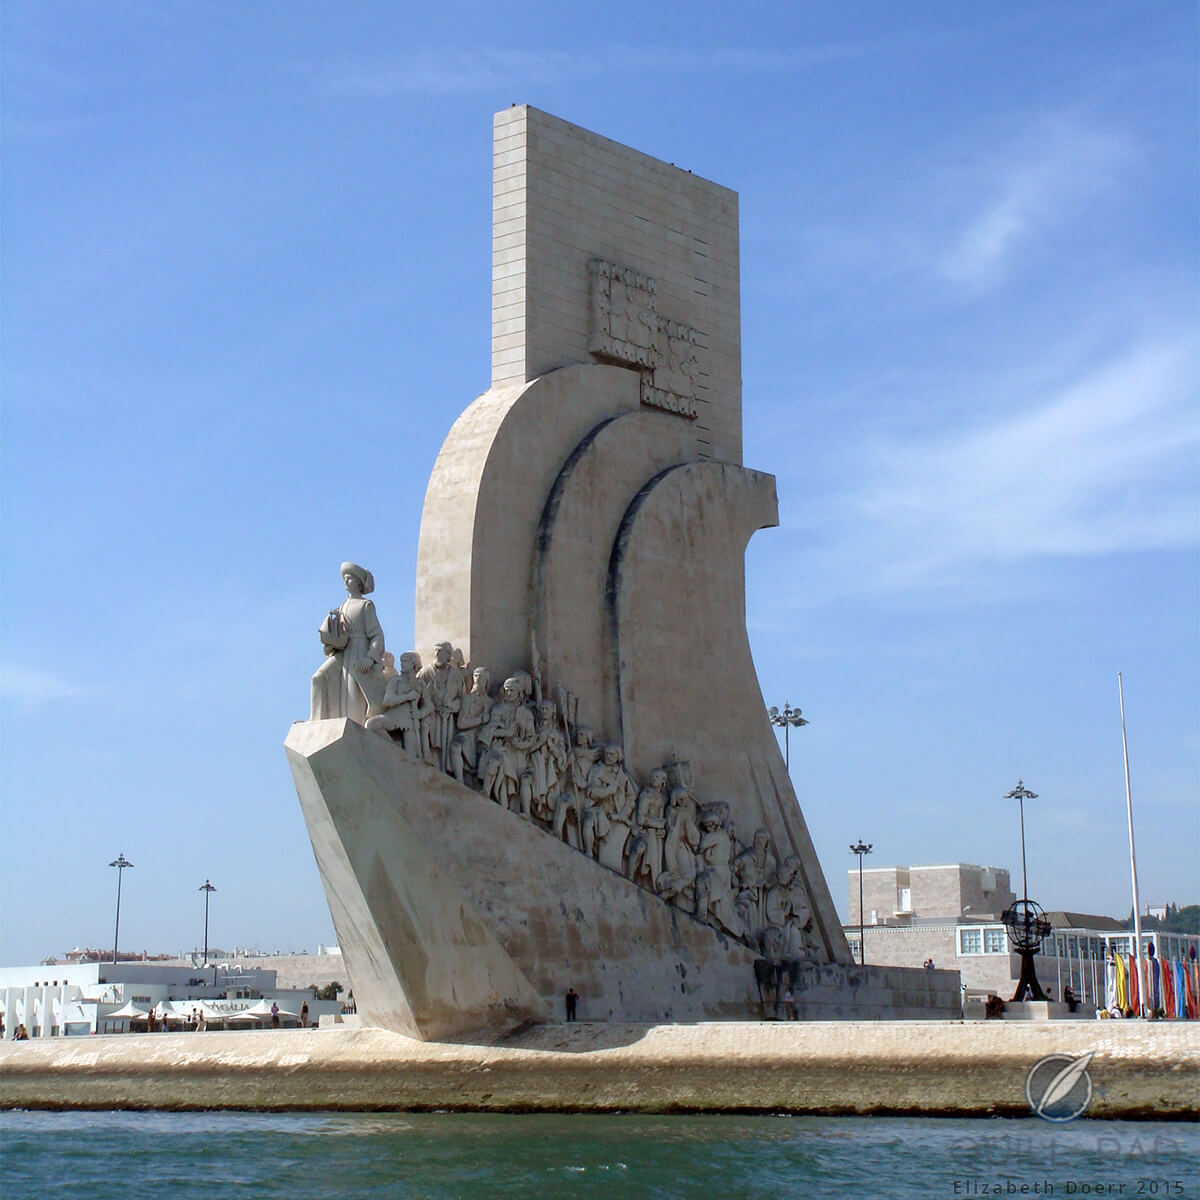 The Padrão dos Descobrimentos monument on the banks of the Tagus River in Lisbon, Portugal